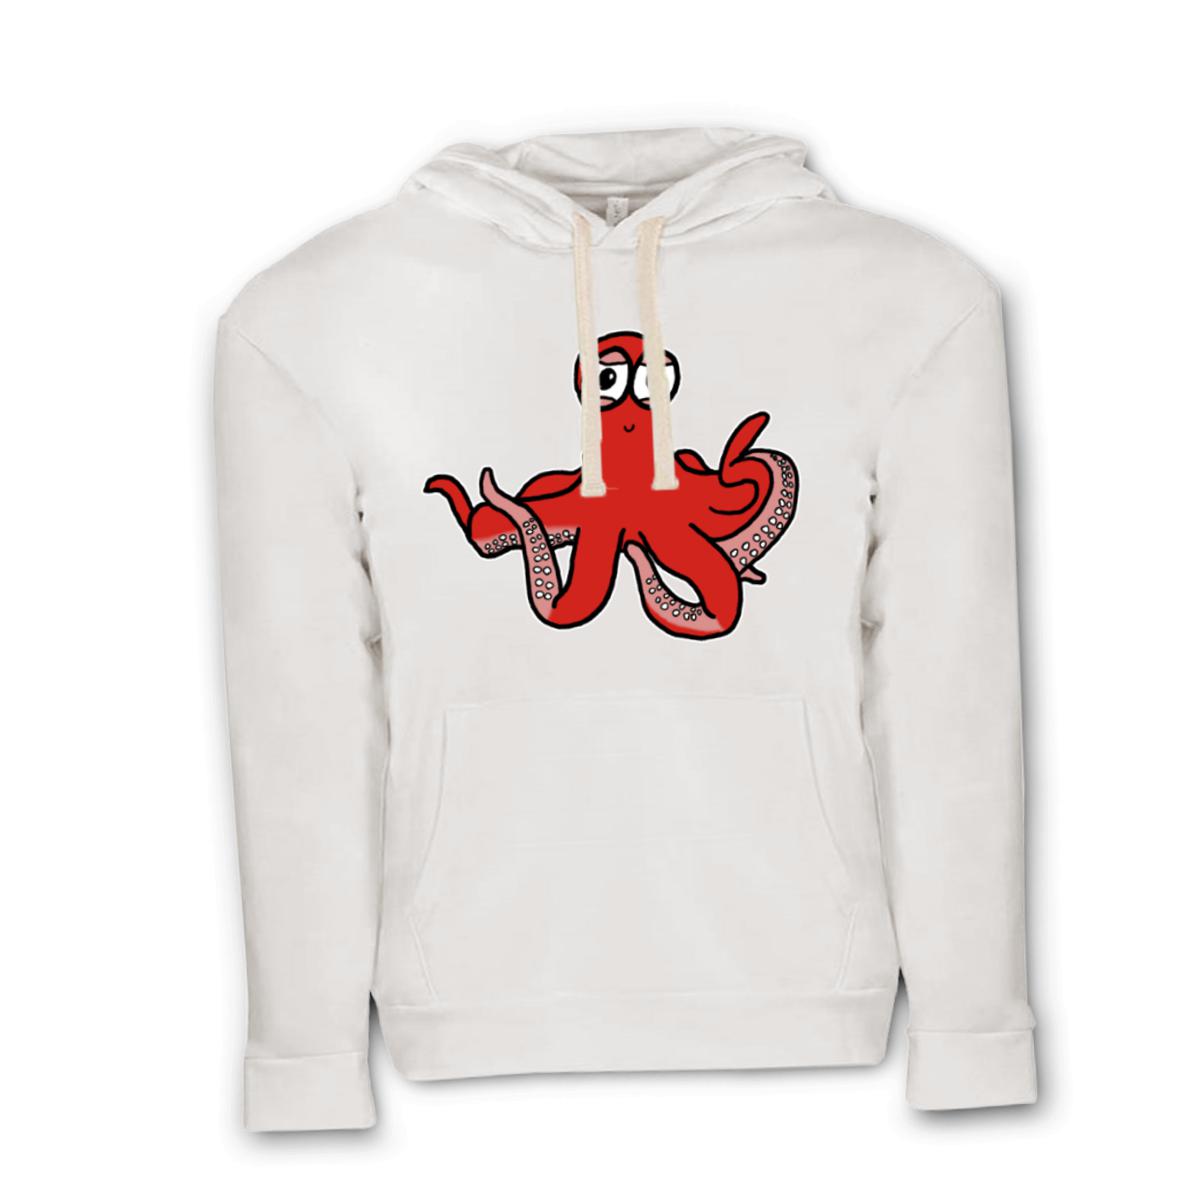 Octopus Unisex Pullover Hoodie Large white